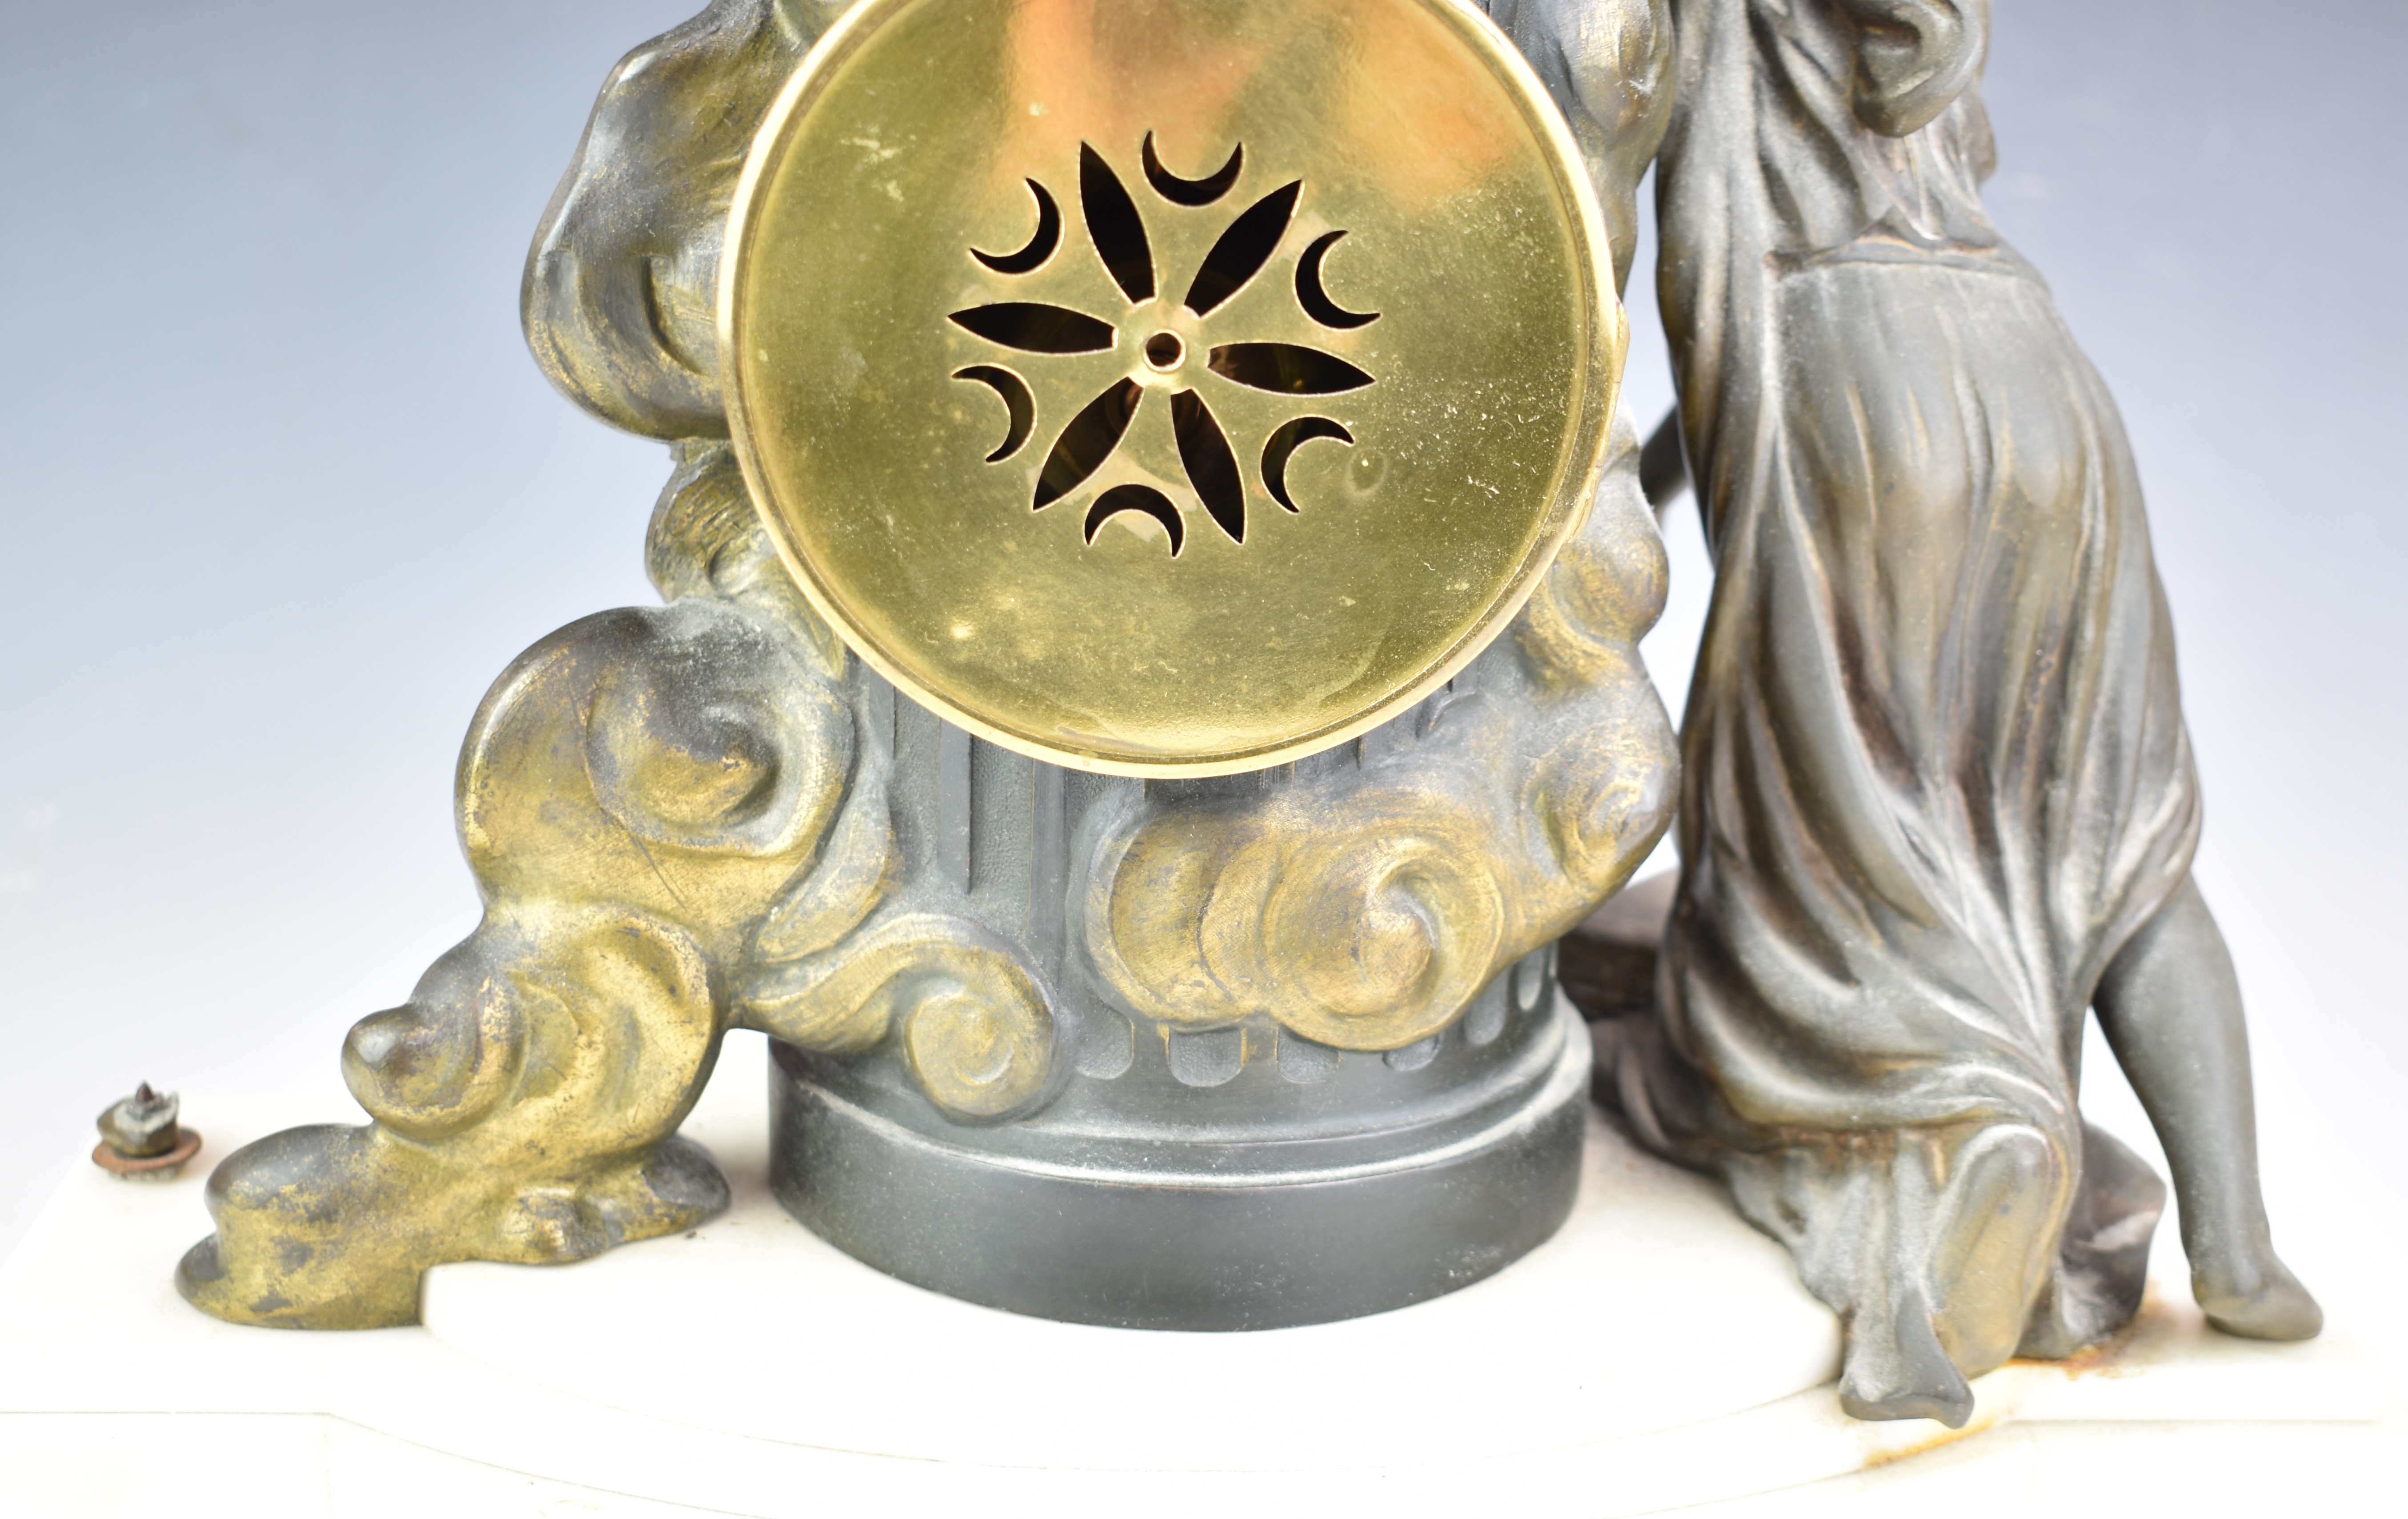 19th or early 20thC marble and gilt metal mantel clock, with white enamel painted dial, striking - Image 9 of 9